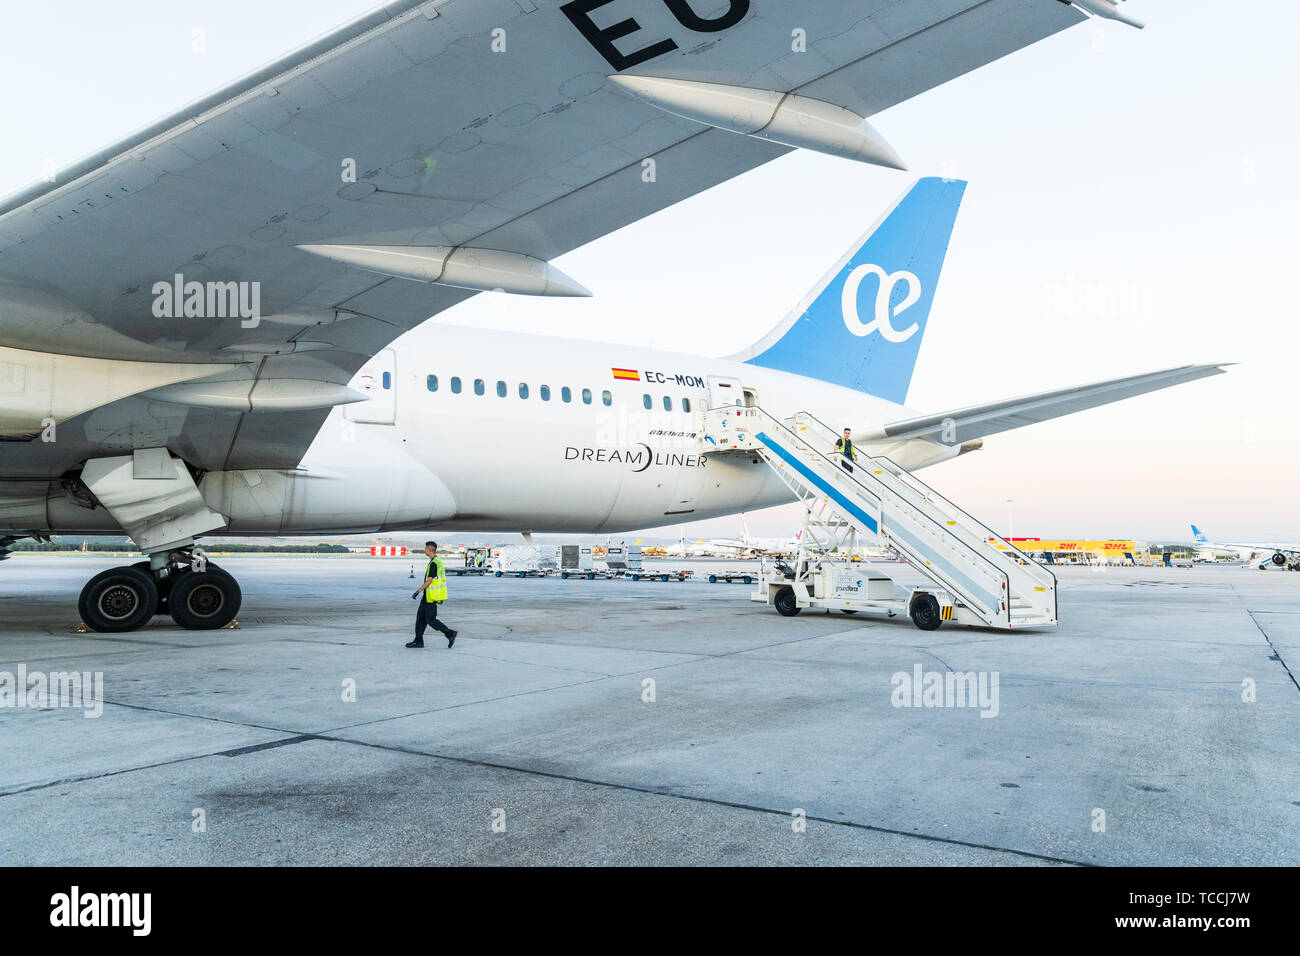 Boeing 787, Dreamliner with Air Europa markings, at Madrid Barajas airport, Spain Stock Photo